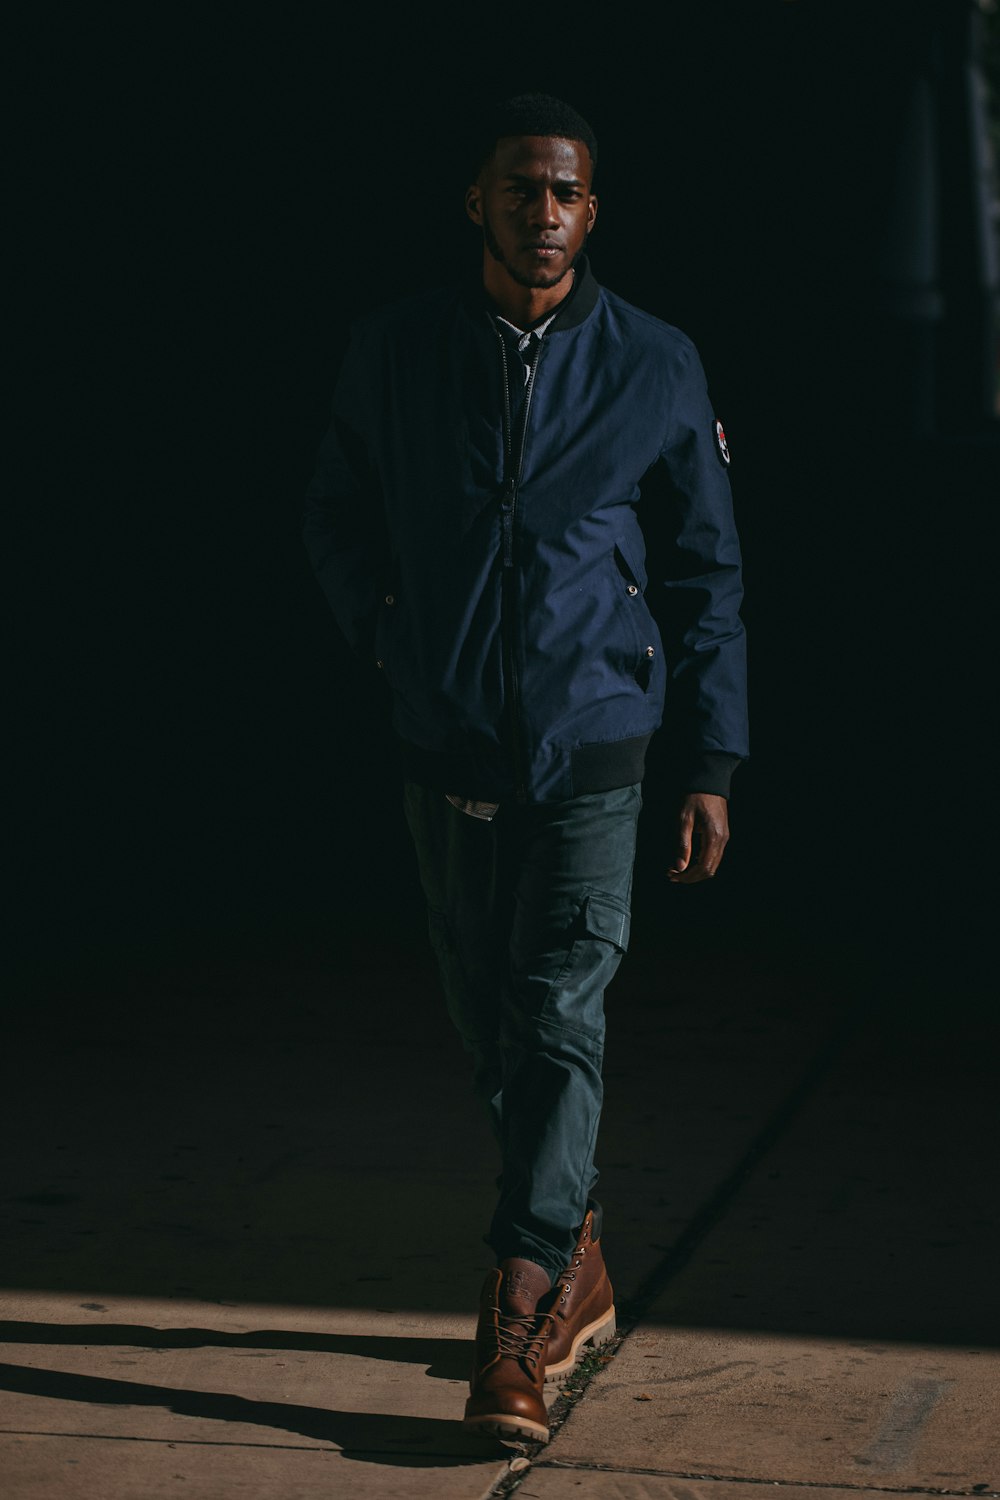 man wearing blue jacket and brown leather boots